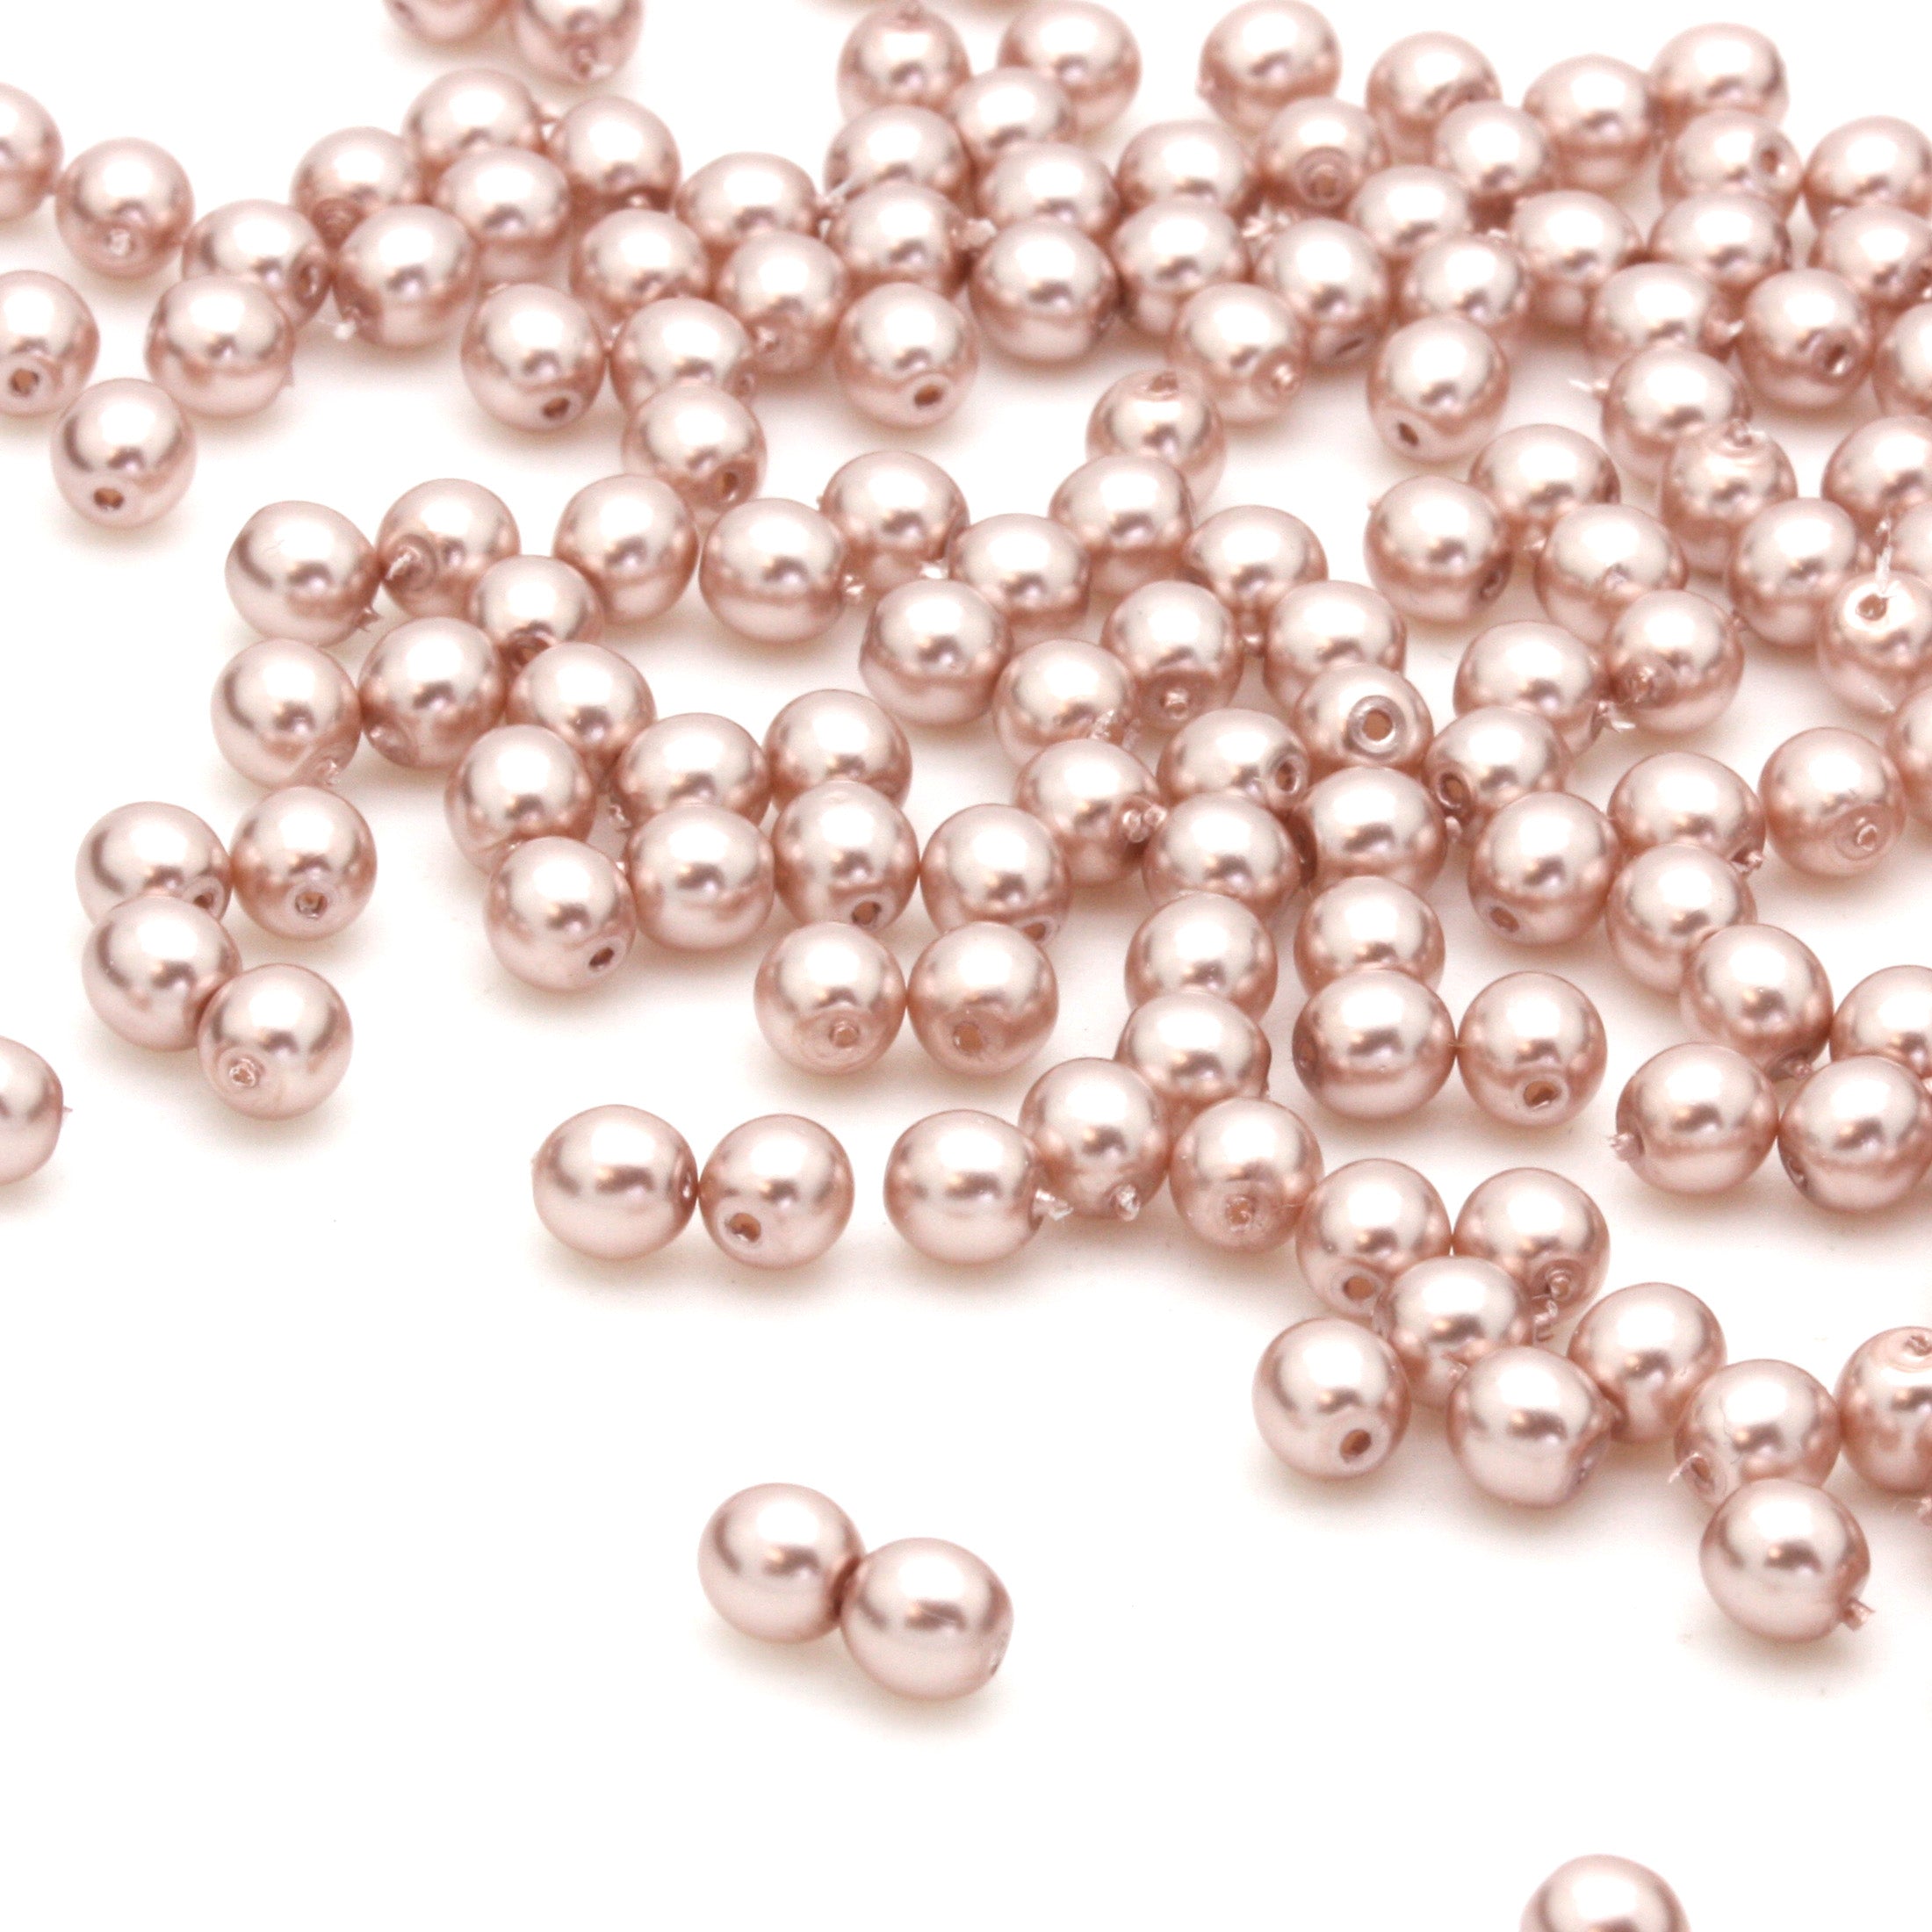 Pearl Palest Dusky Pink Glass Round 4mm - Pack of 200